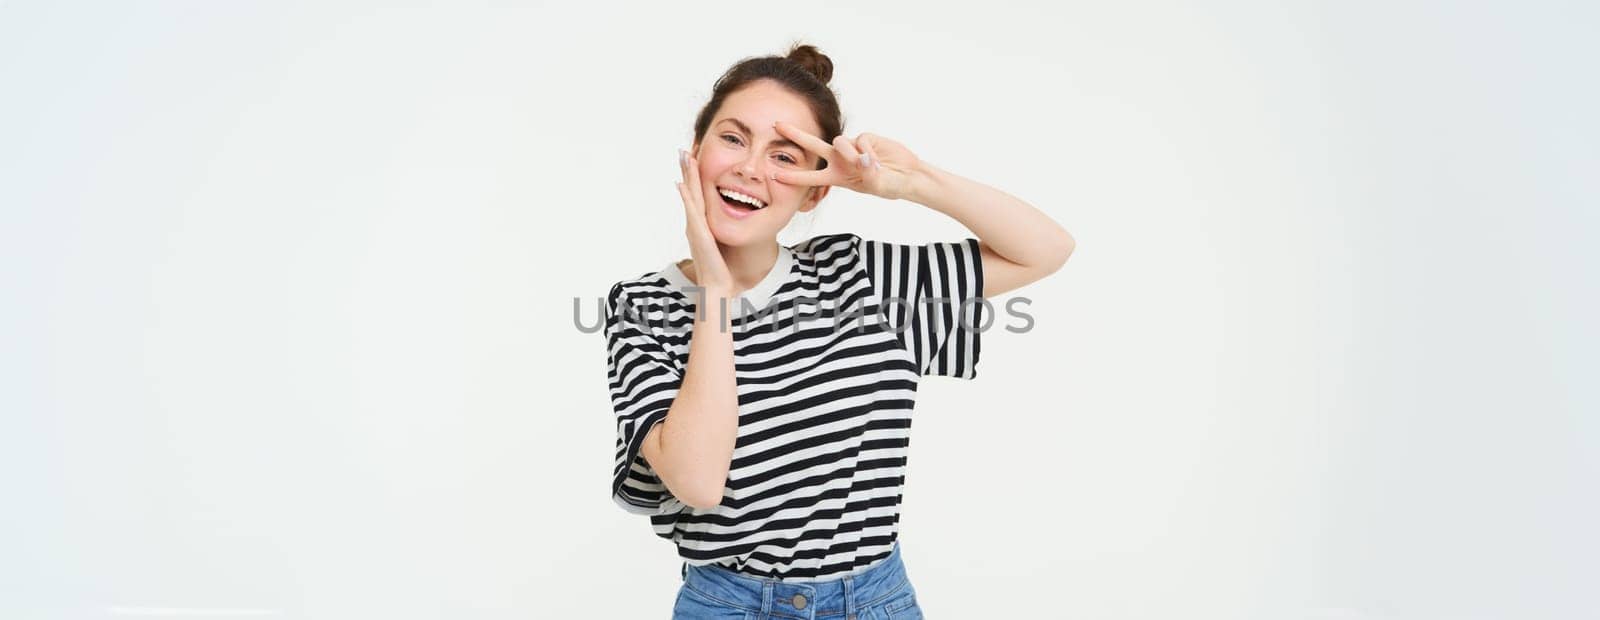 Cute european woman posing for photo, holding peace, kawaii hand gesture near face, smiling at camera, standing over white background.